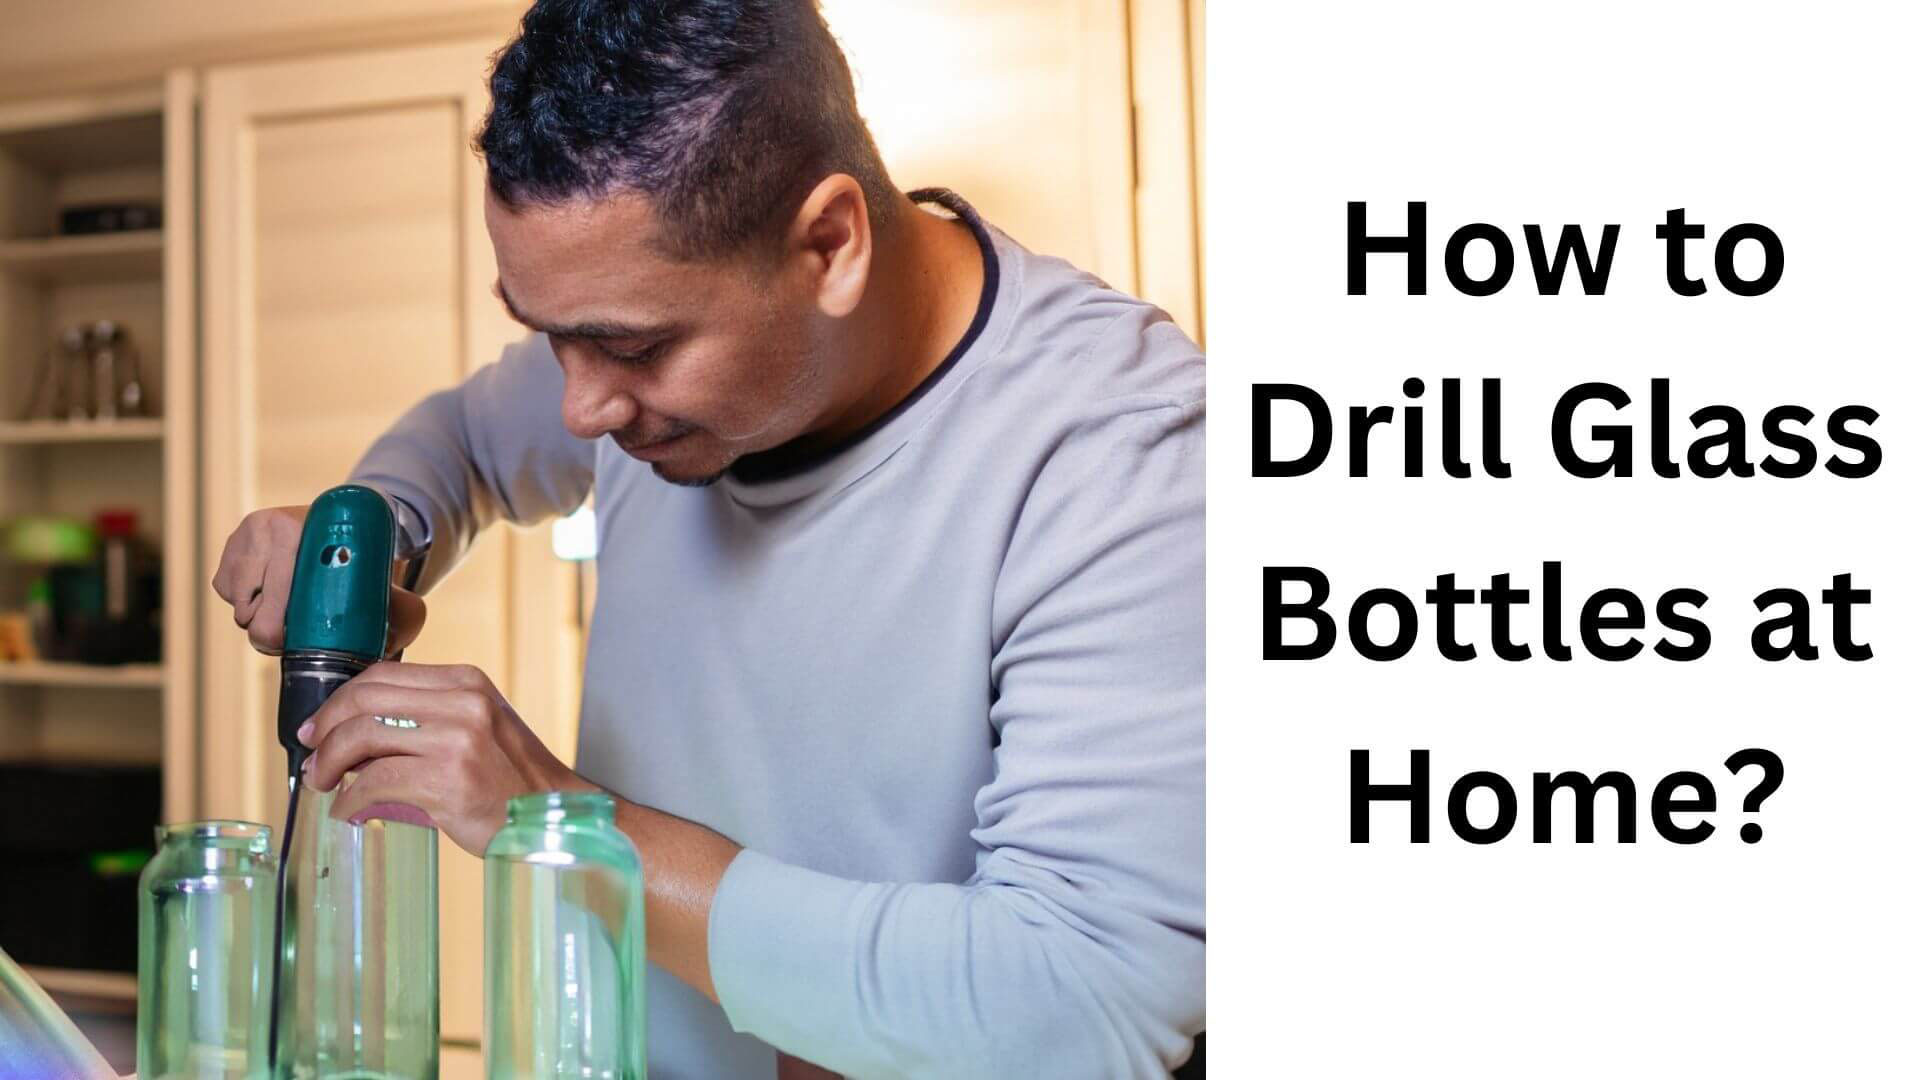 How to Drill Glass Bottles at Home